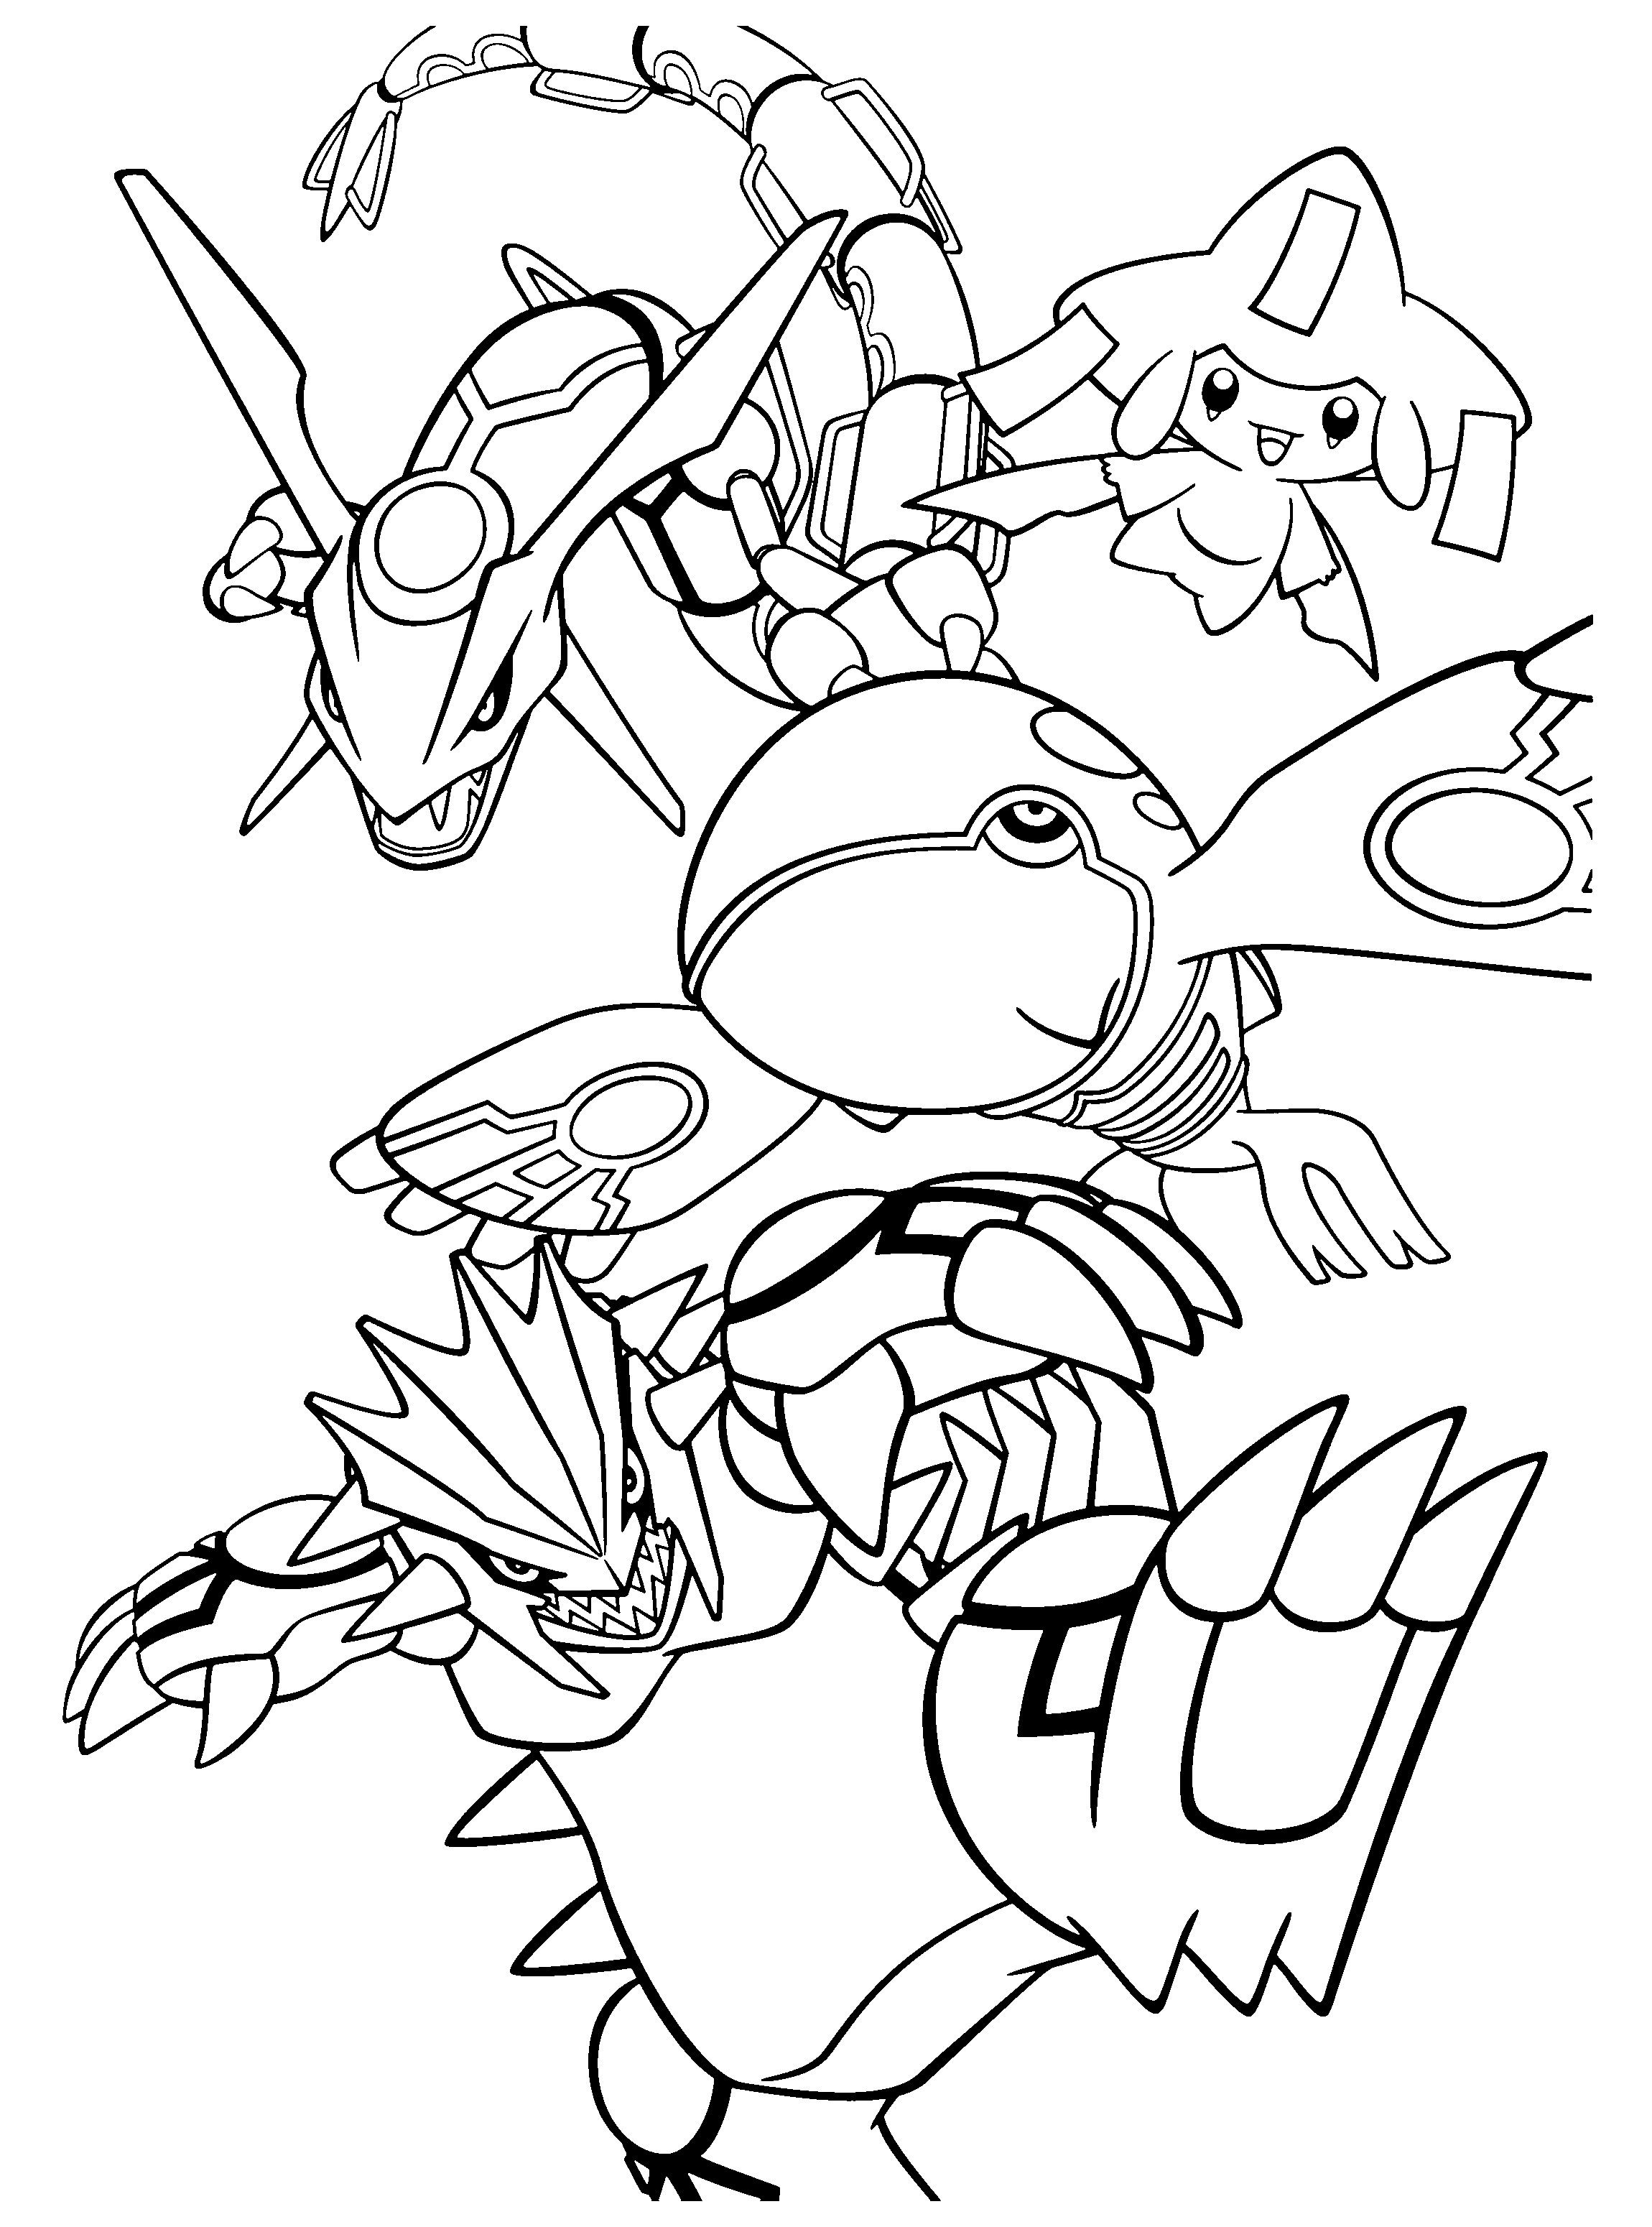 Pokemon coloring pages groudon and kyogre â through the thousand photographs on the net with regards to pâ coloriage pokemon coloriage dessin pokemon ã imprimer